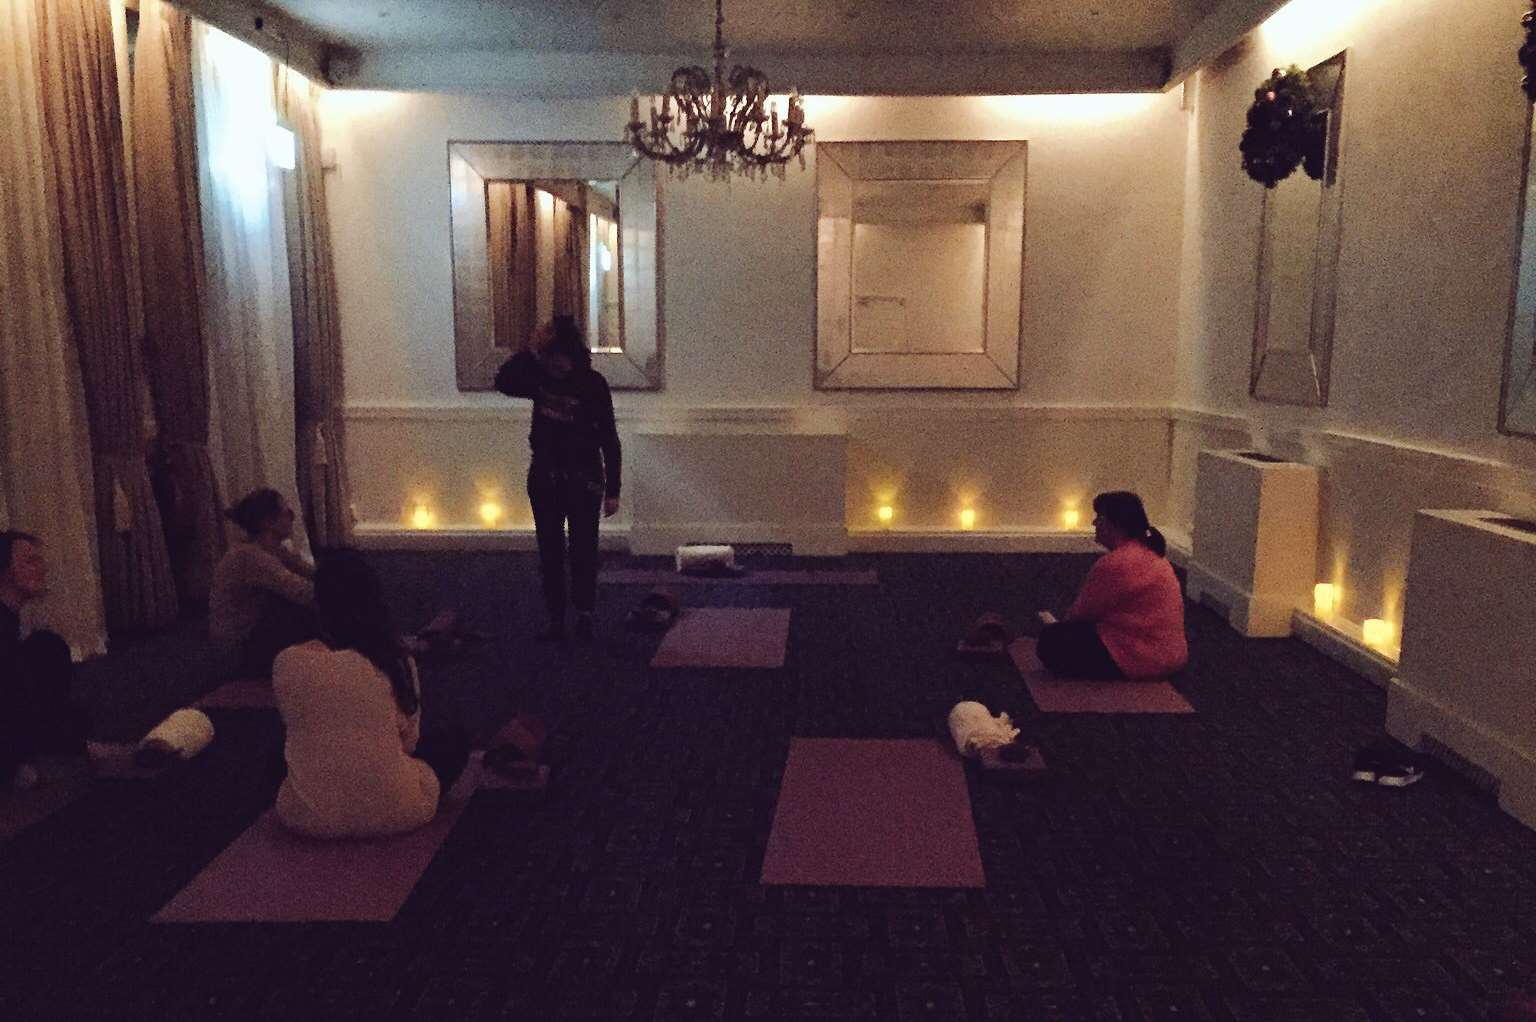 The yoga activities in the former coach house. Credit: Molly Mileham-Chappell